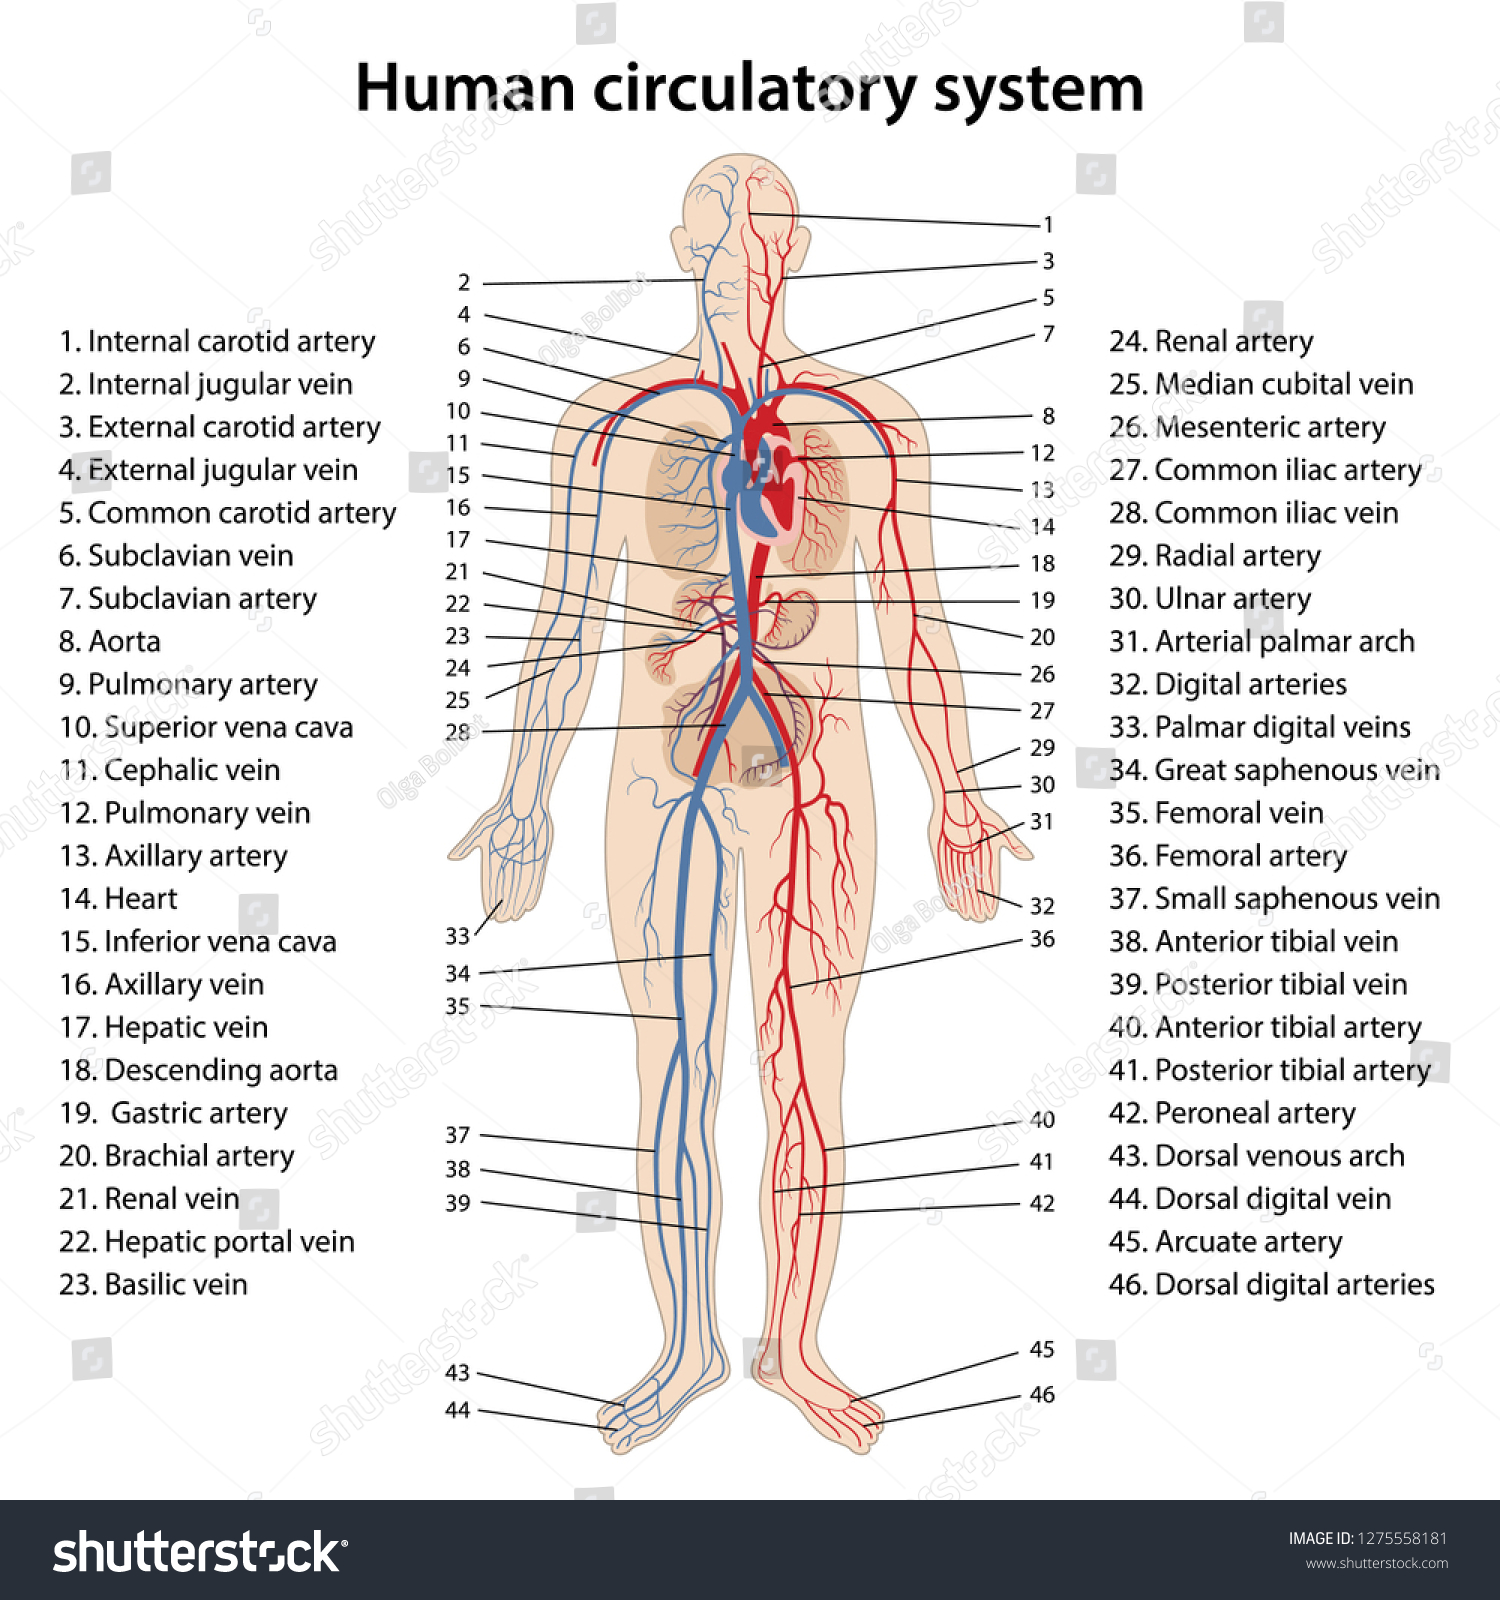 Image result for the human circulatory system